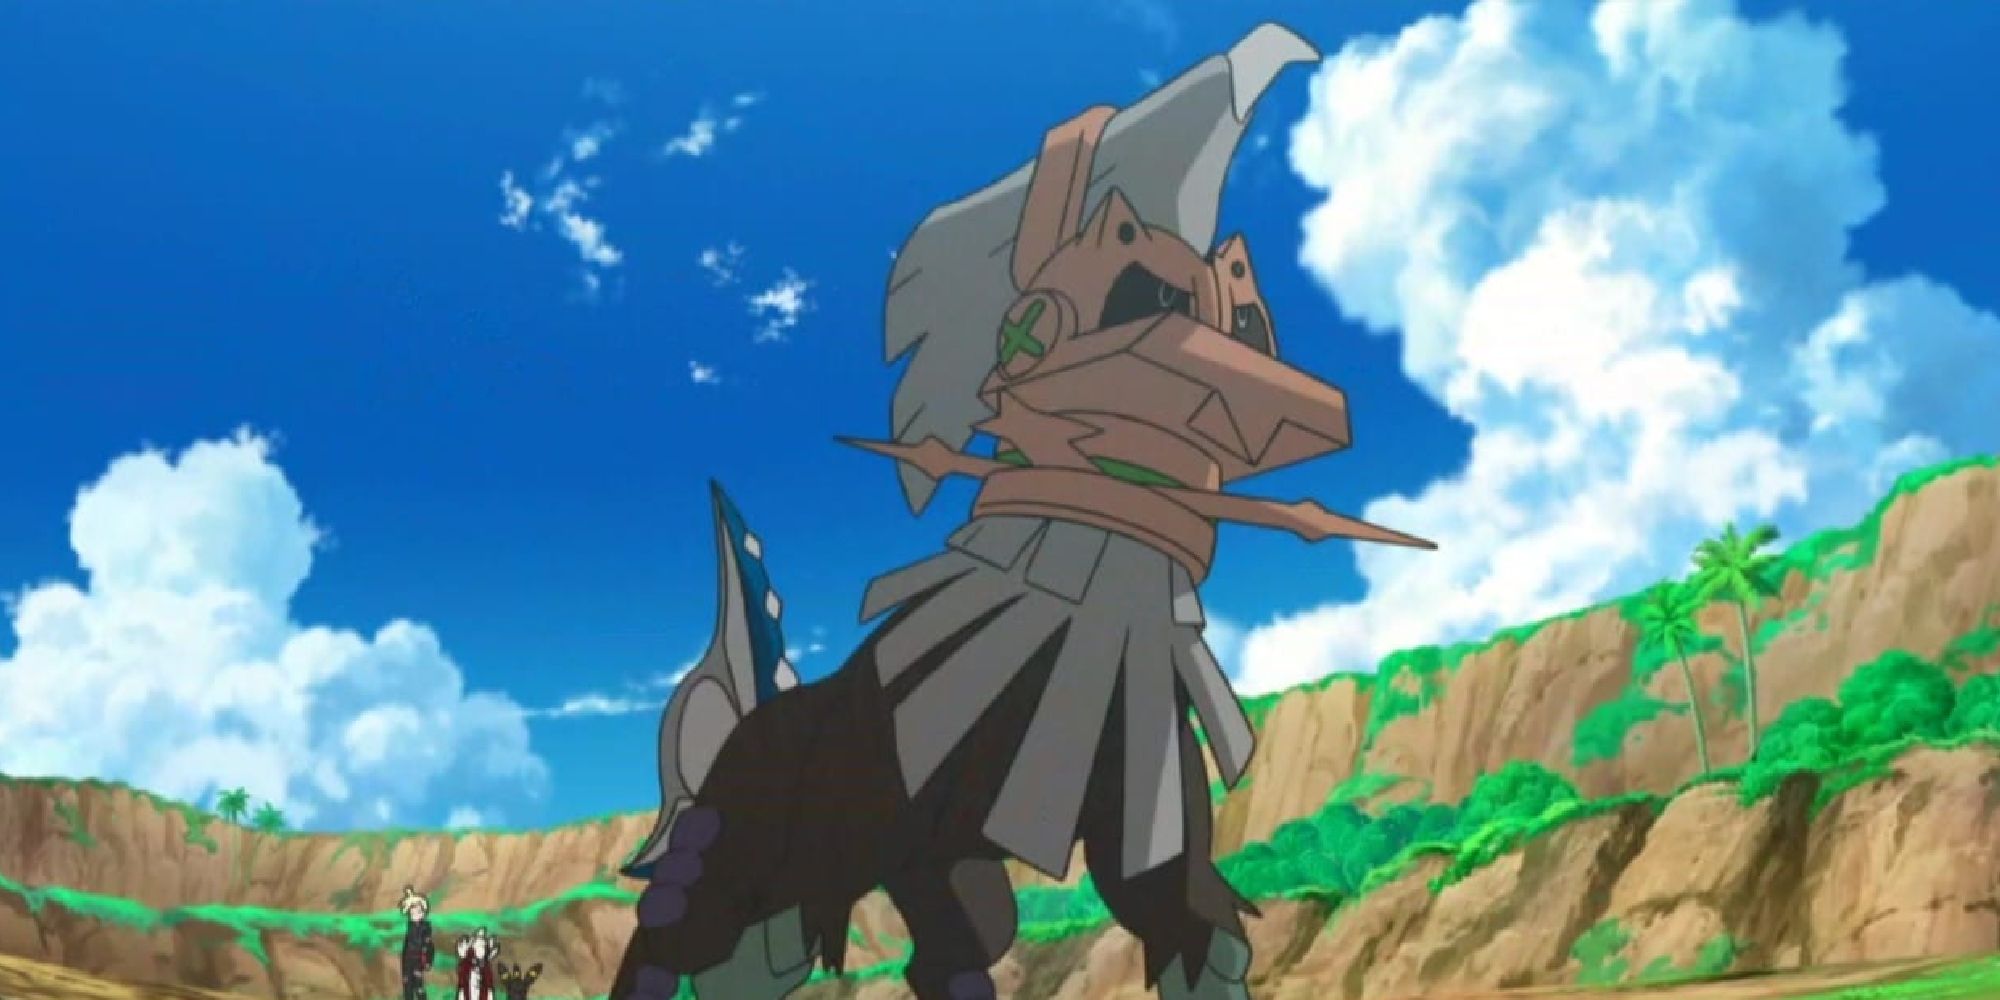 Type Null sent out by Gladion in the Pokemon anime